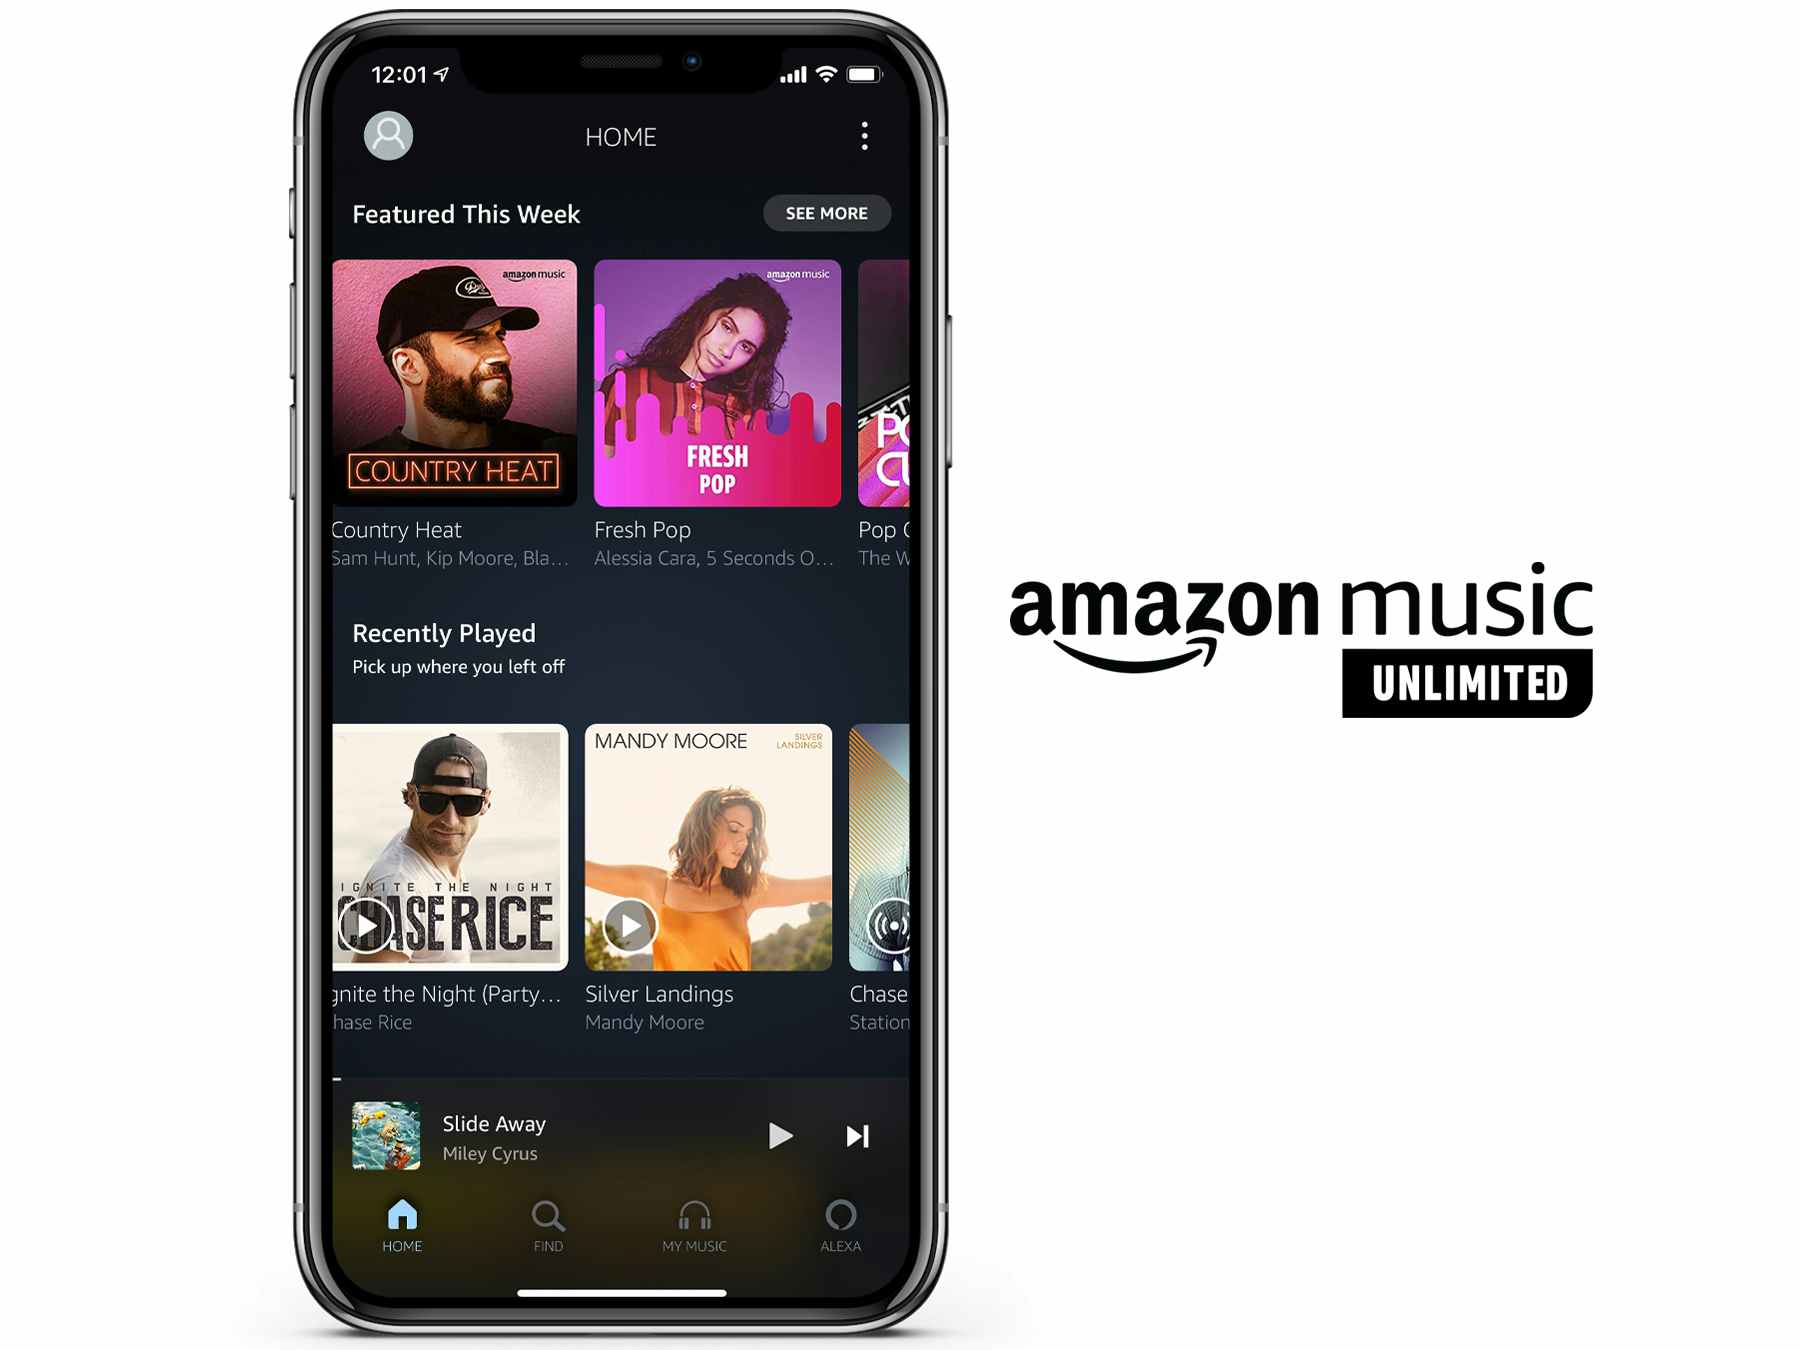 A digital cell phone with the Amazon Music Unlimited app displayed and the company logo beside it.